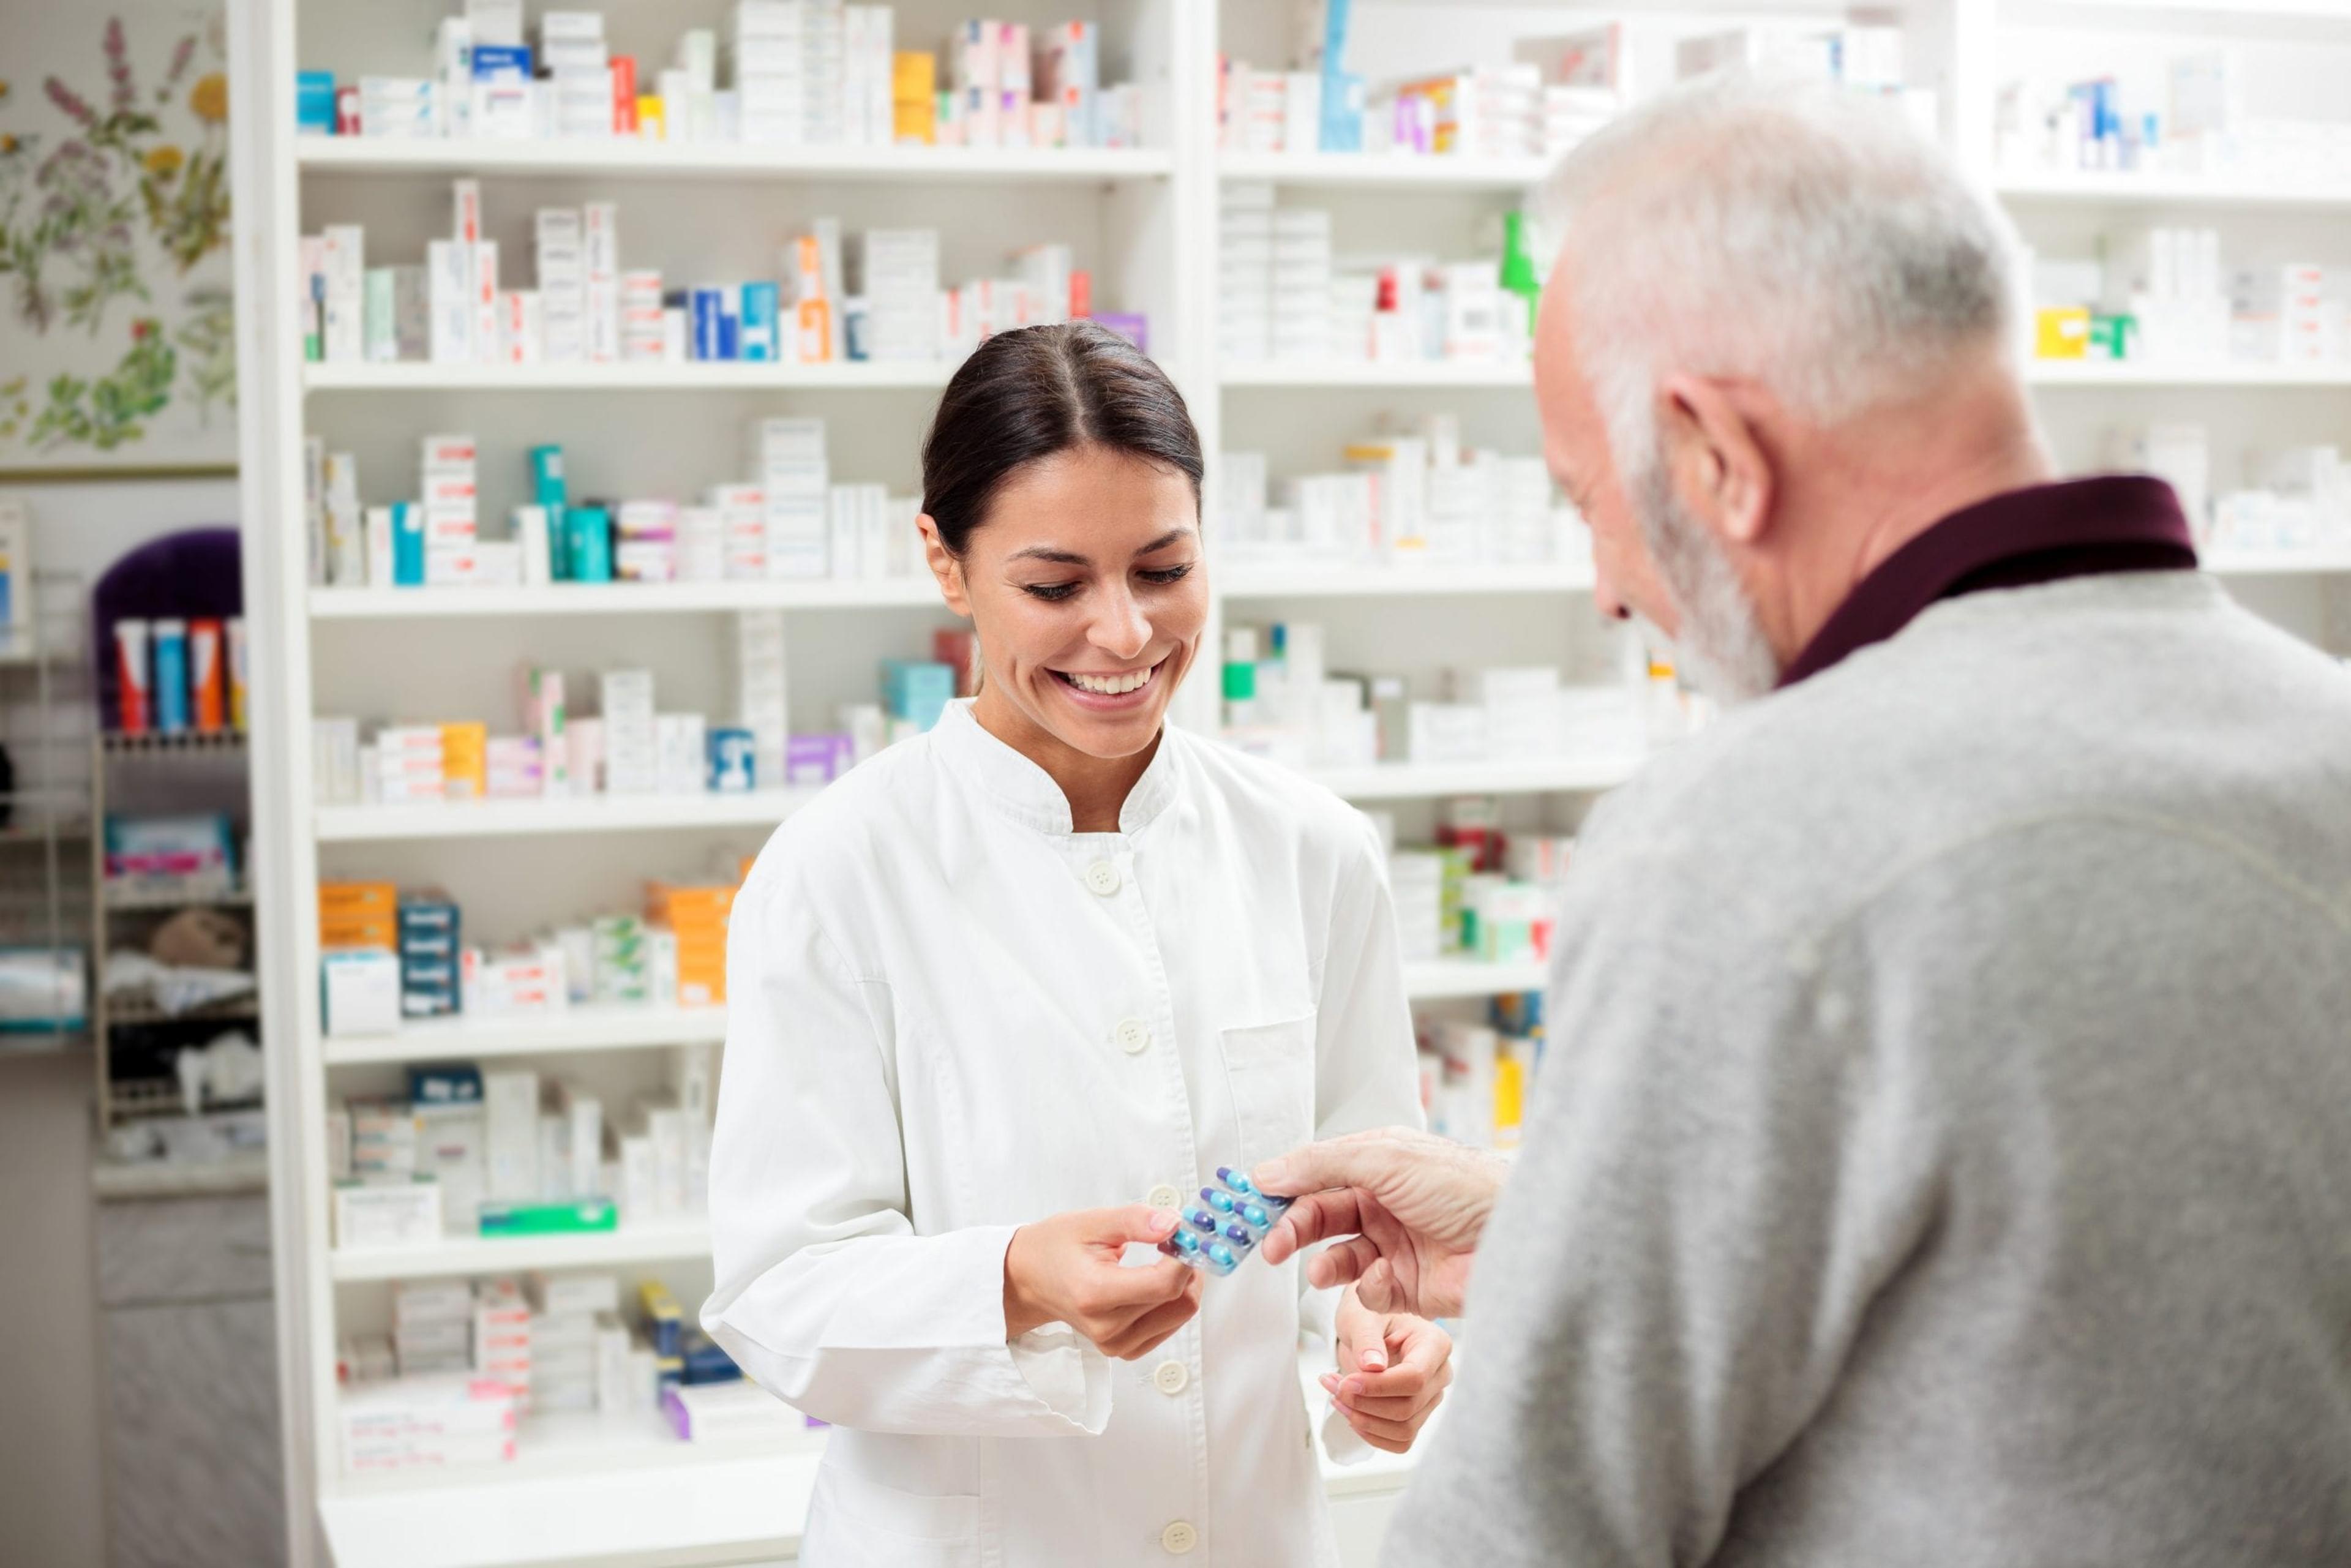 Female pharmacist giving medication to a customer.